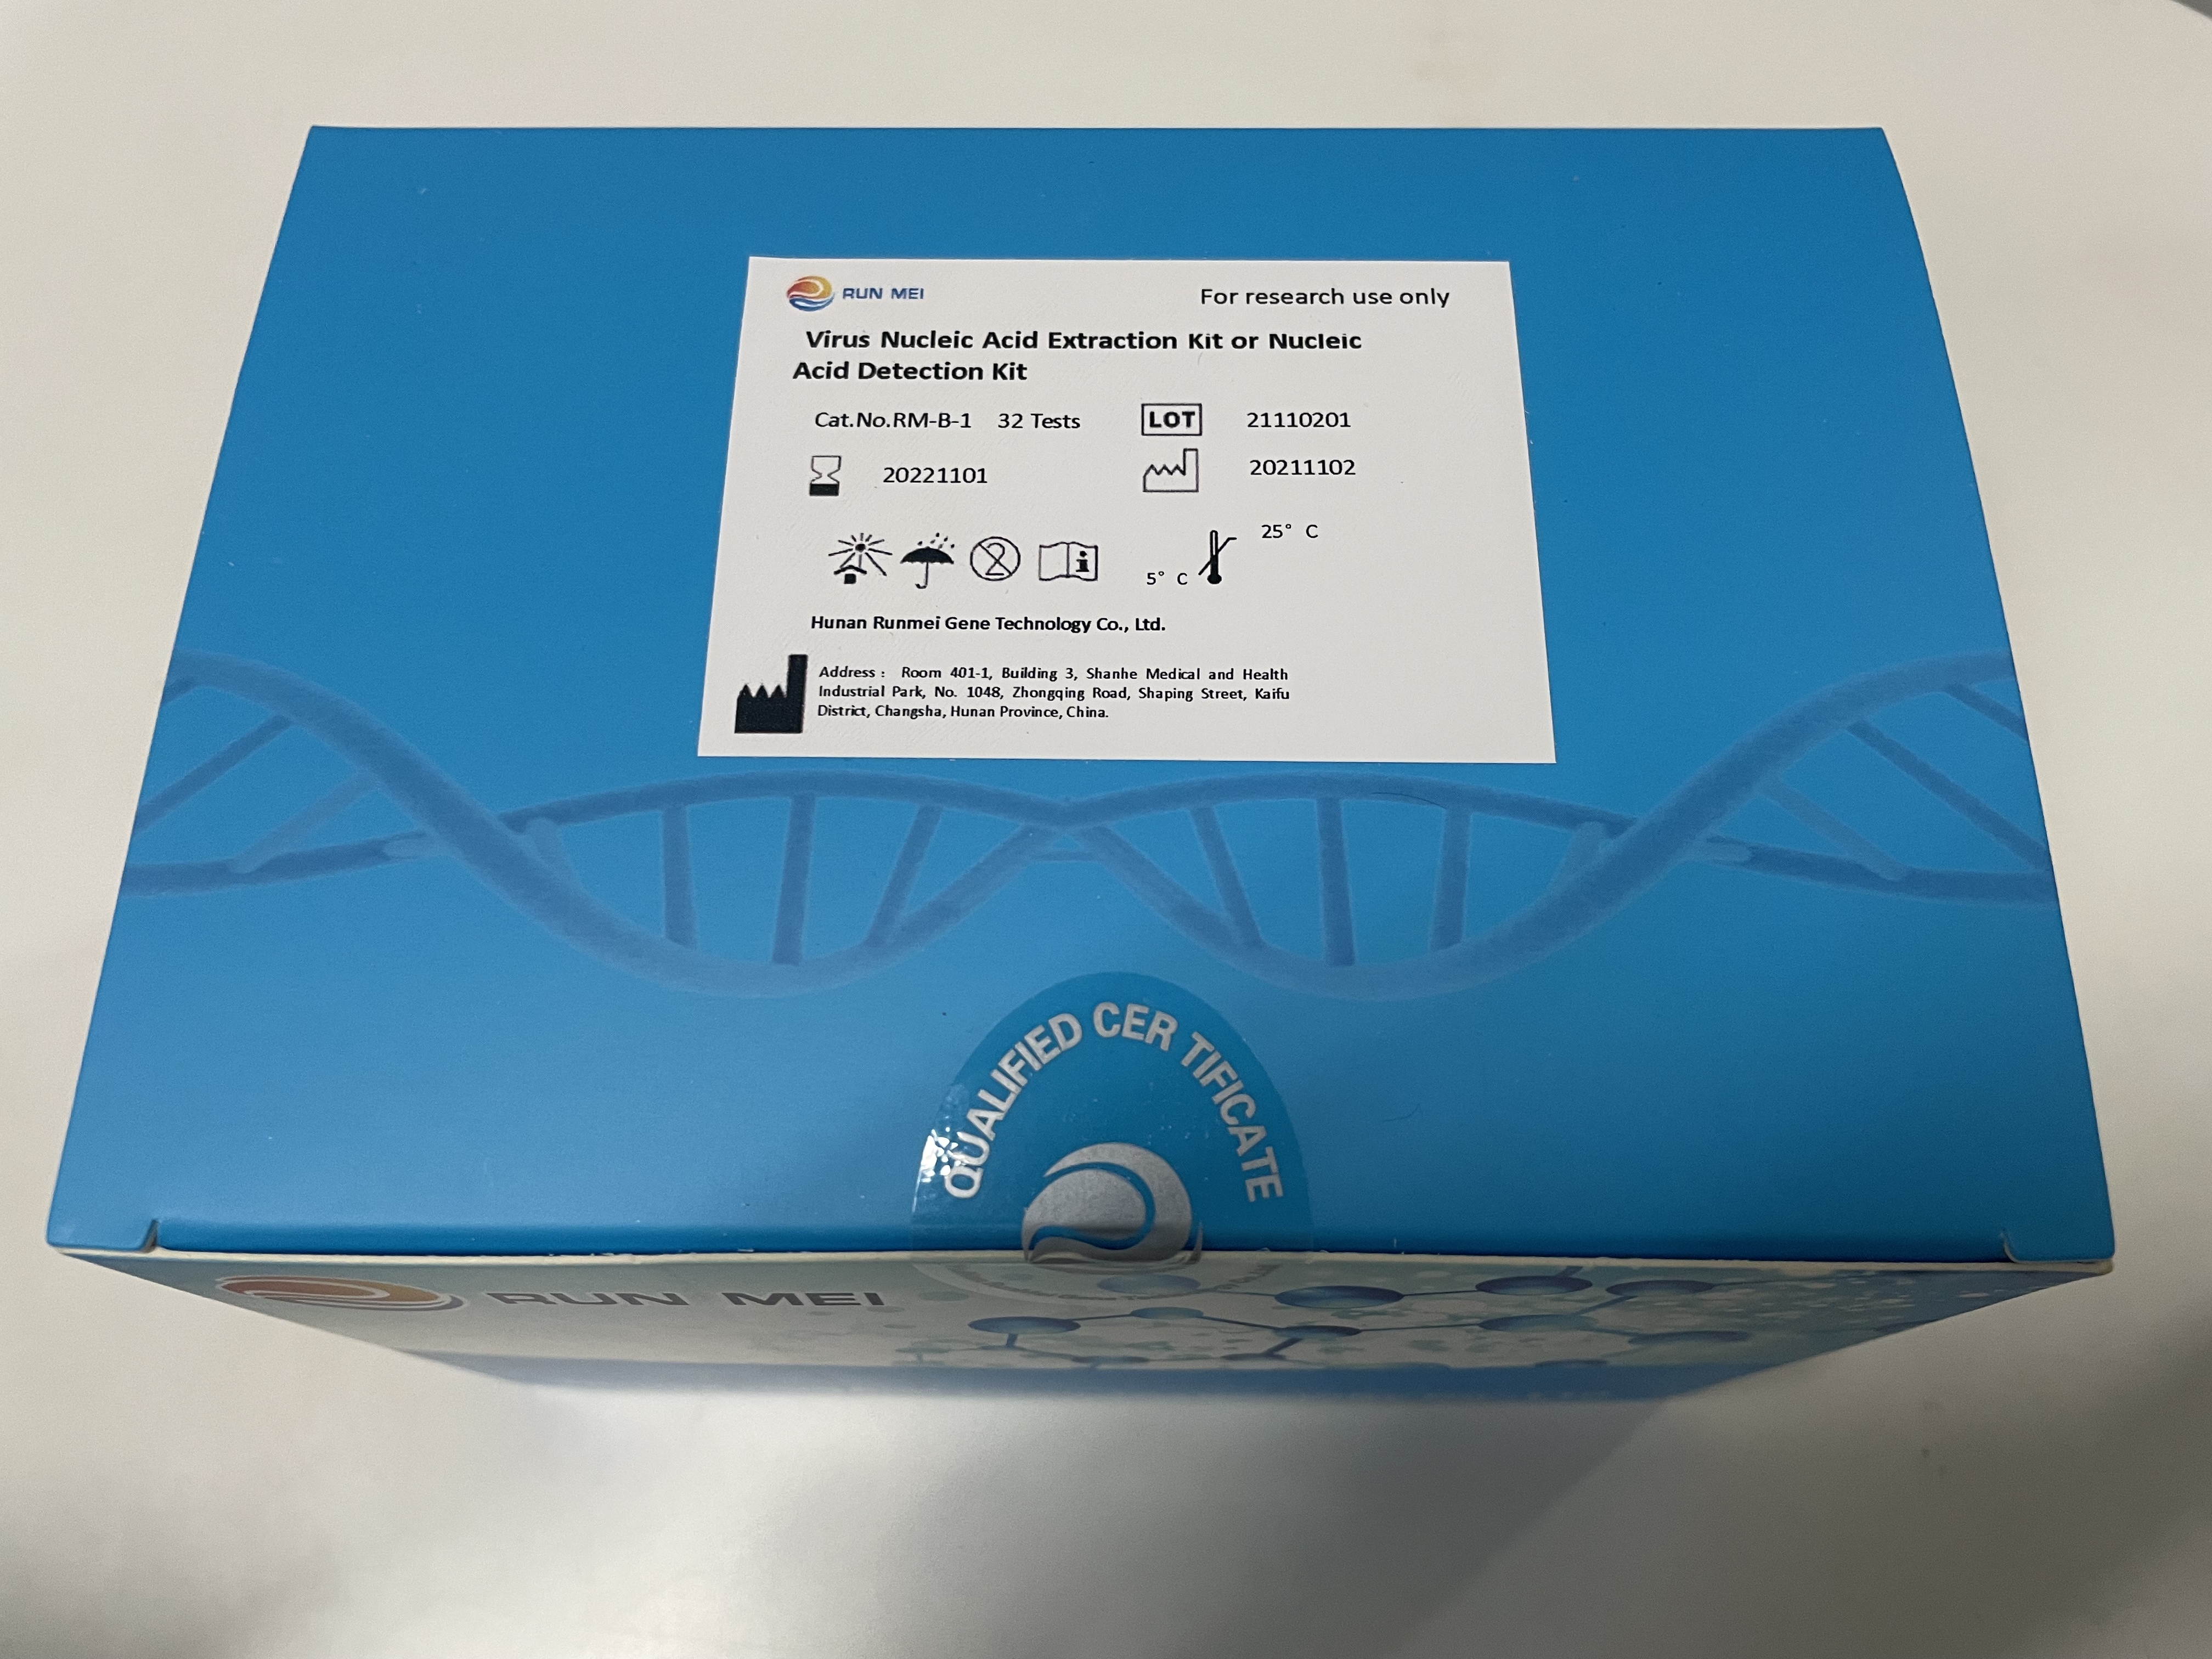 Virus Nucleic Acid Extraction or Nucleic Acid Detection Kit(RM-B-1)